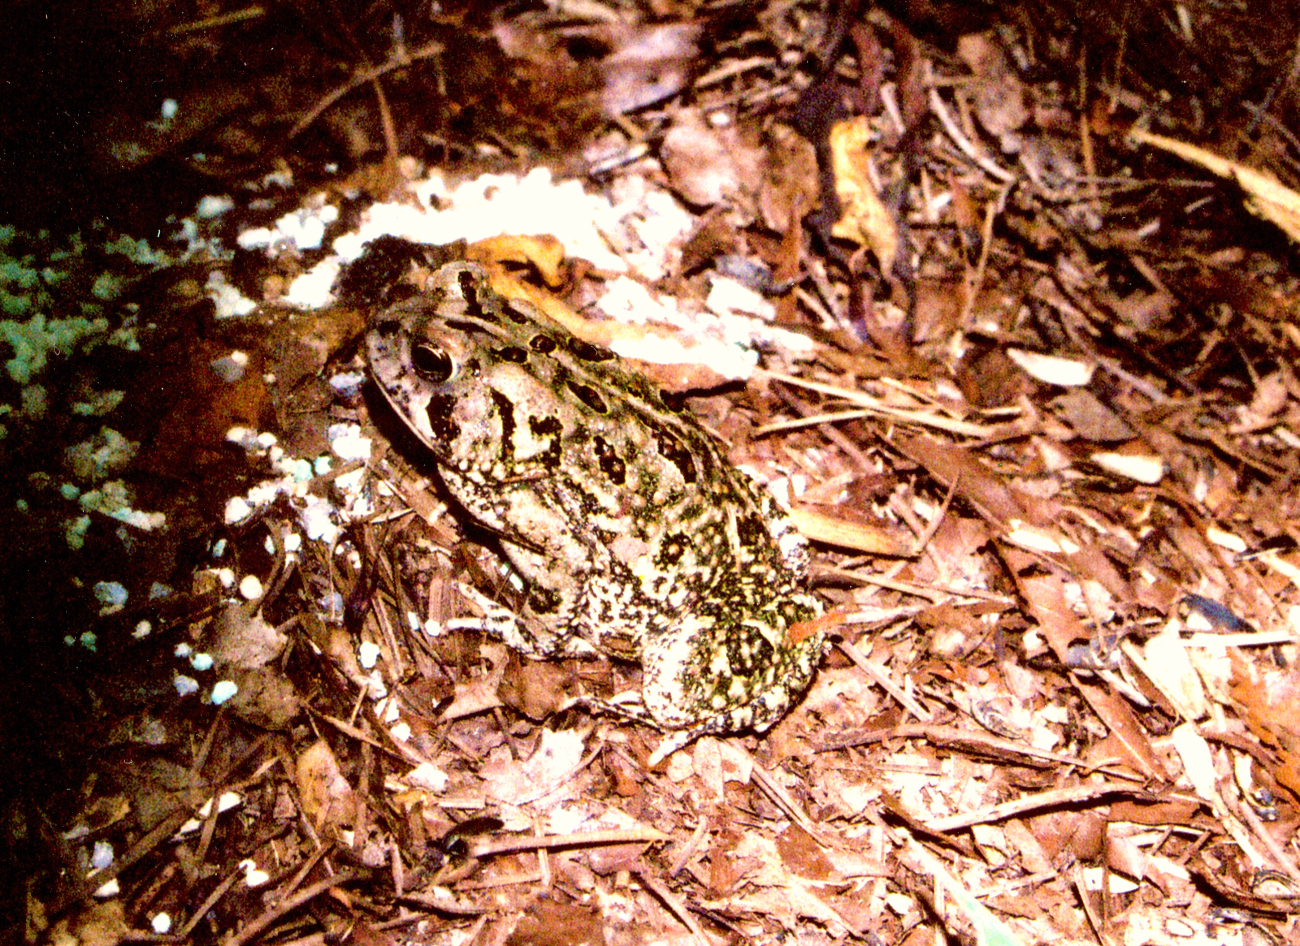 A large toad at night